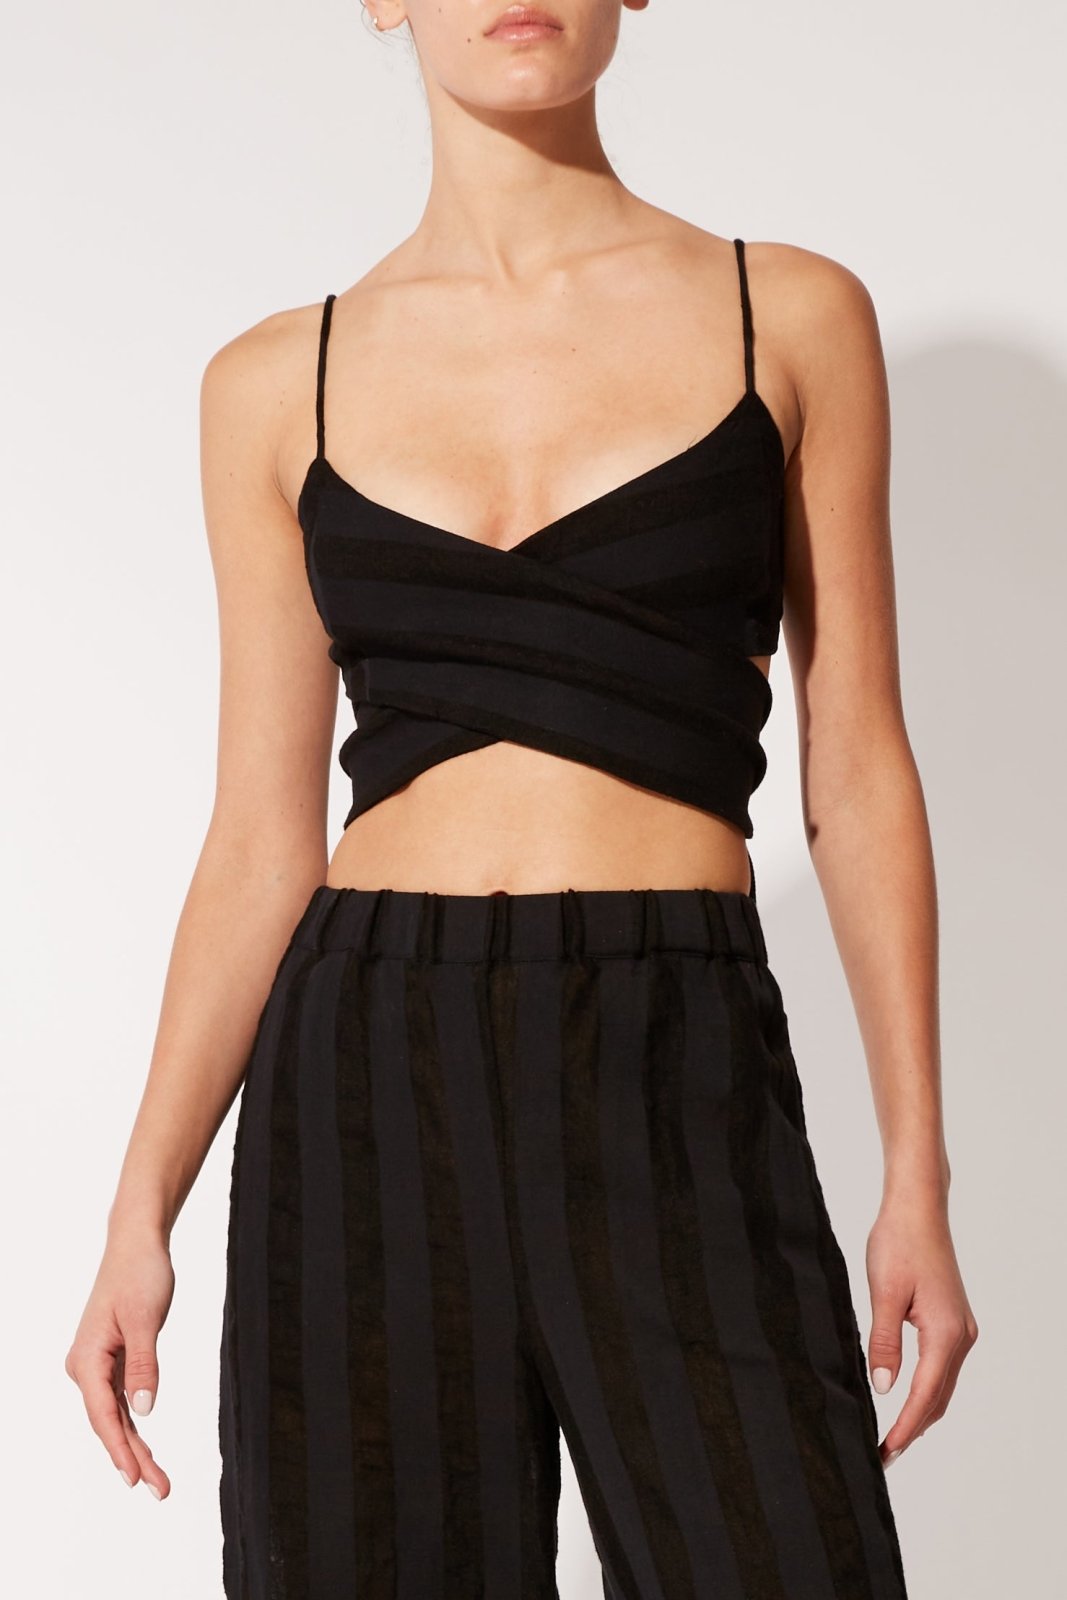 The Delaney Top - Solid & Striped